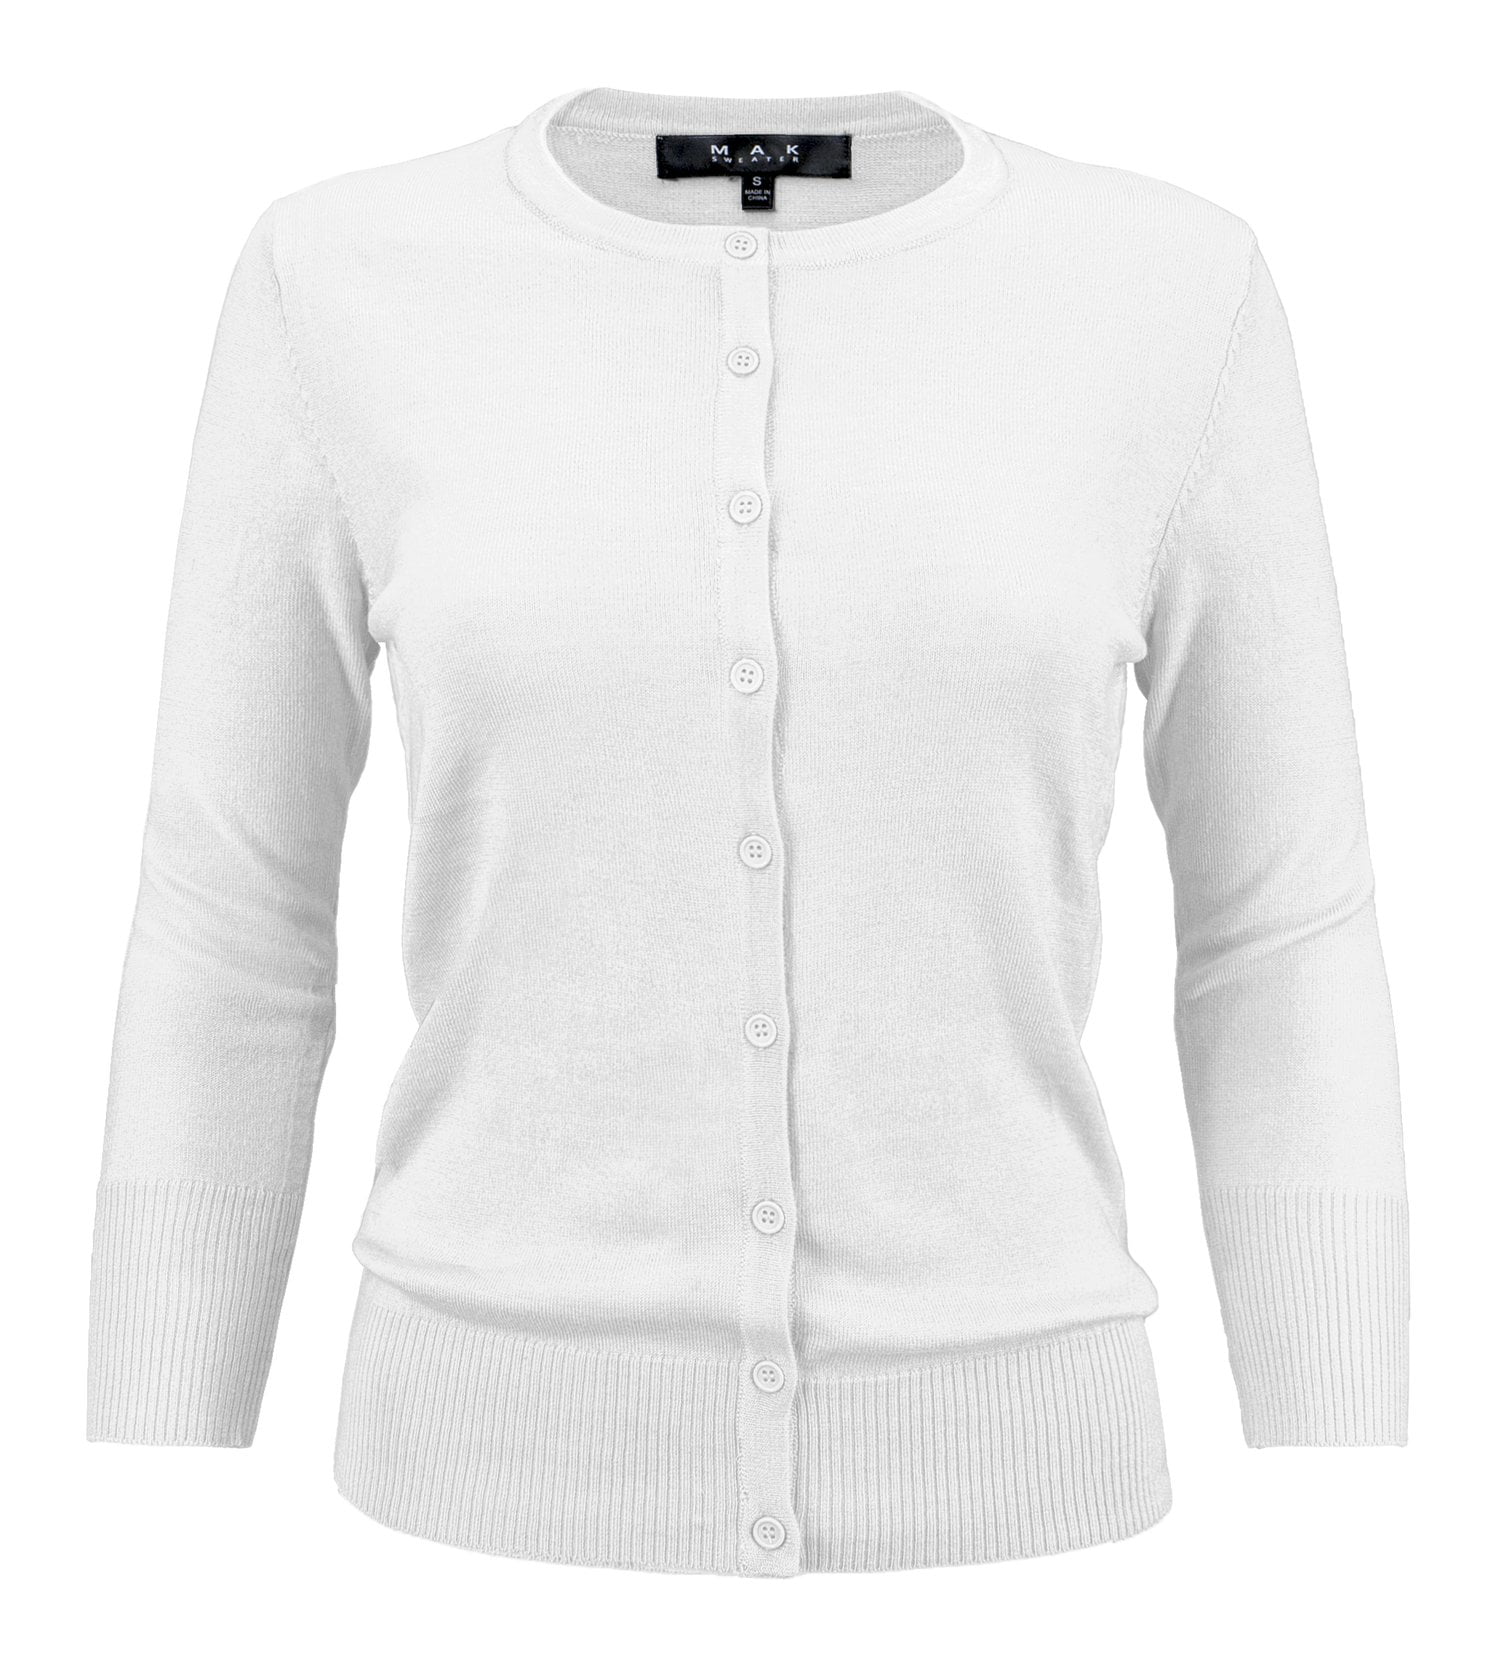 EIMIN Womens 3/4 Sleeve V-Neck Button Down Stretch Knit Cardigan Sweater S-3X 